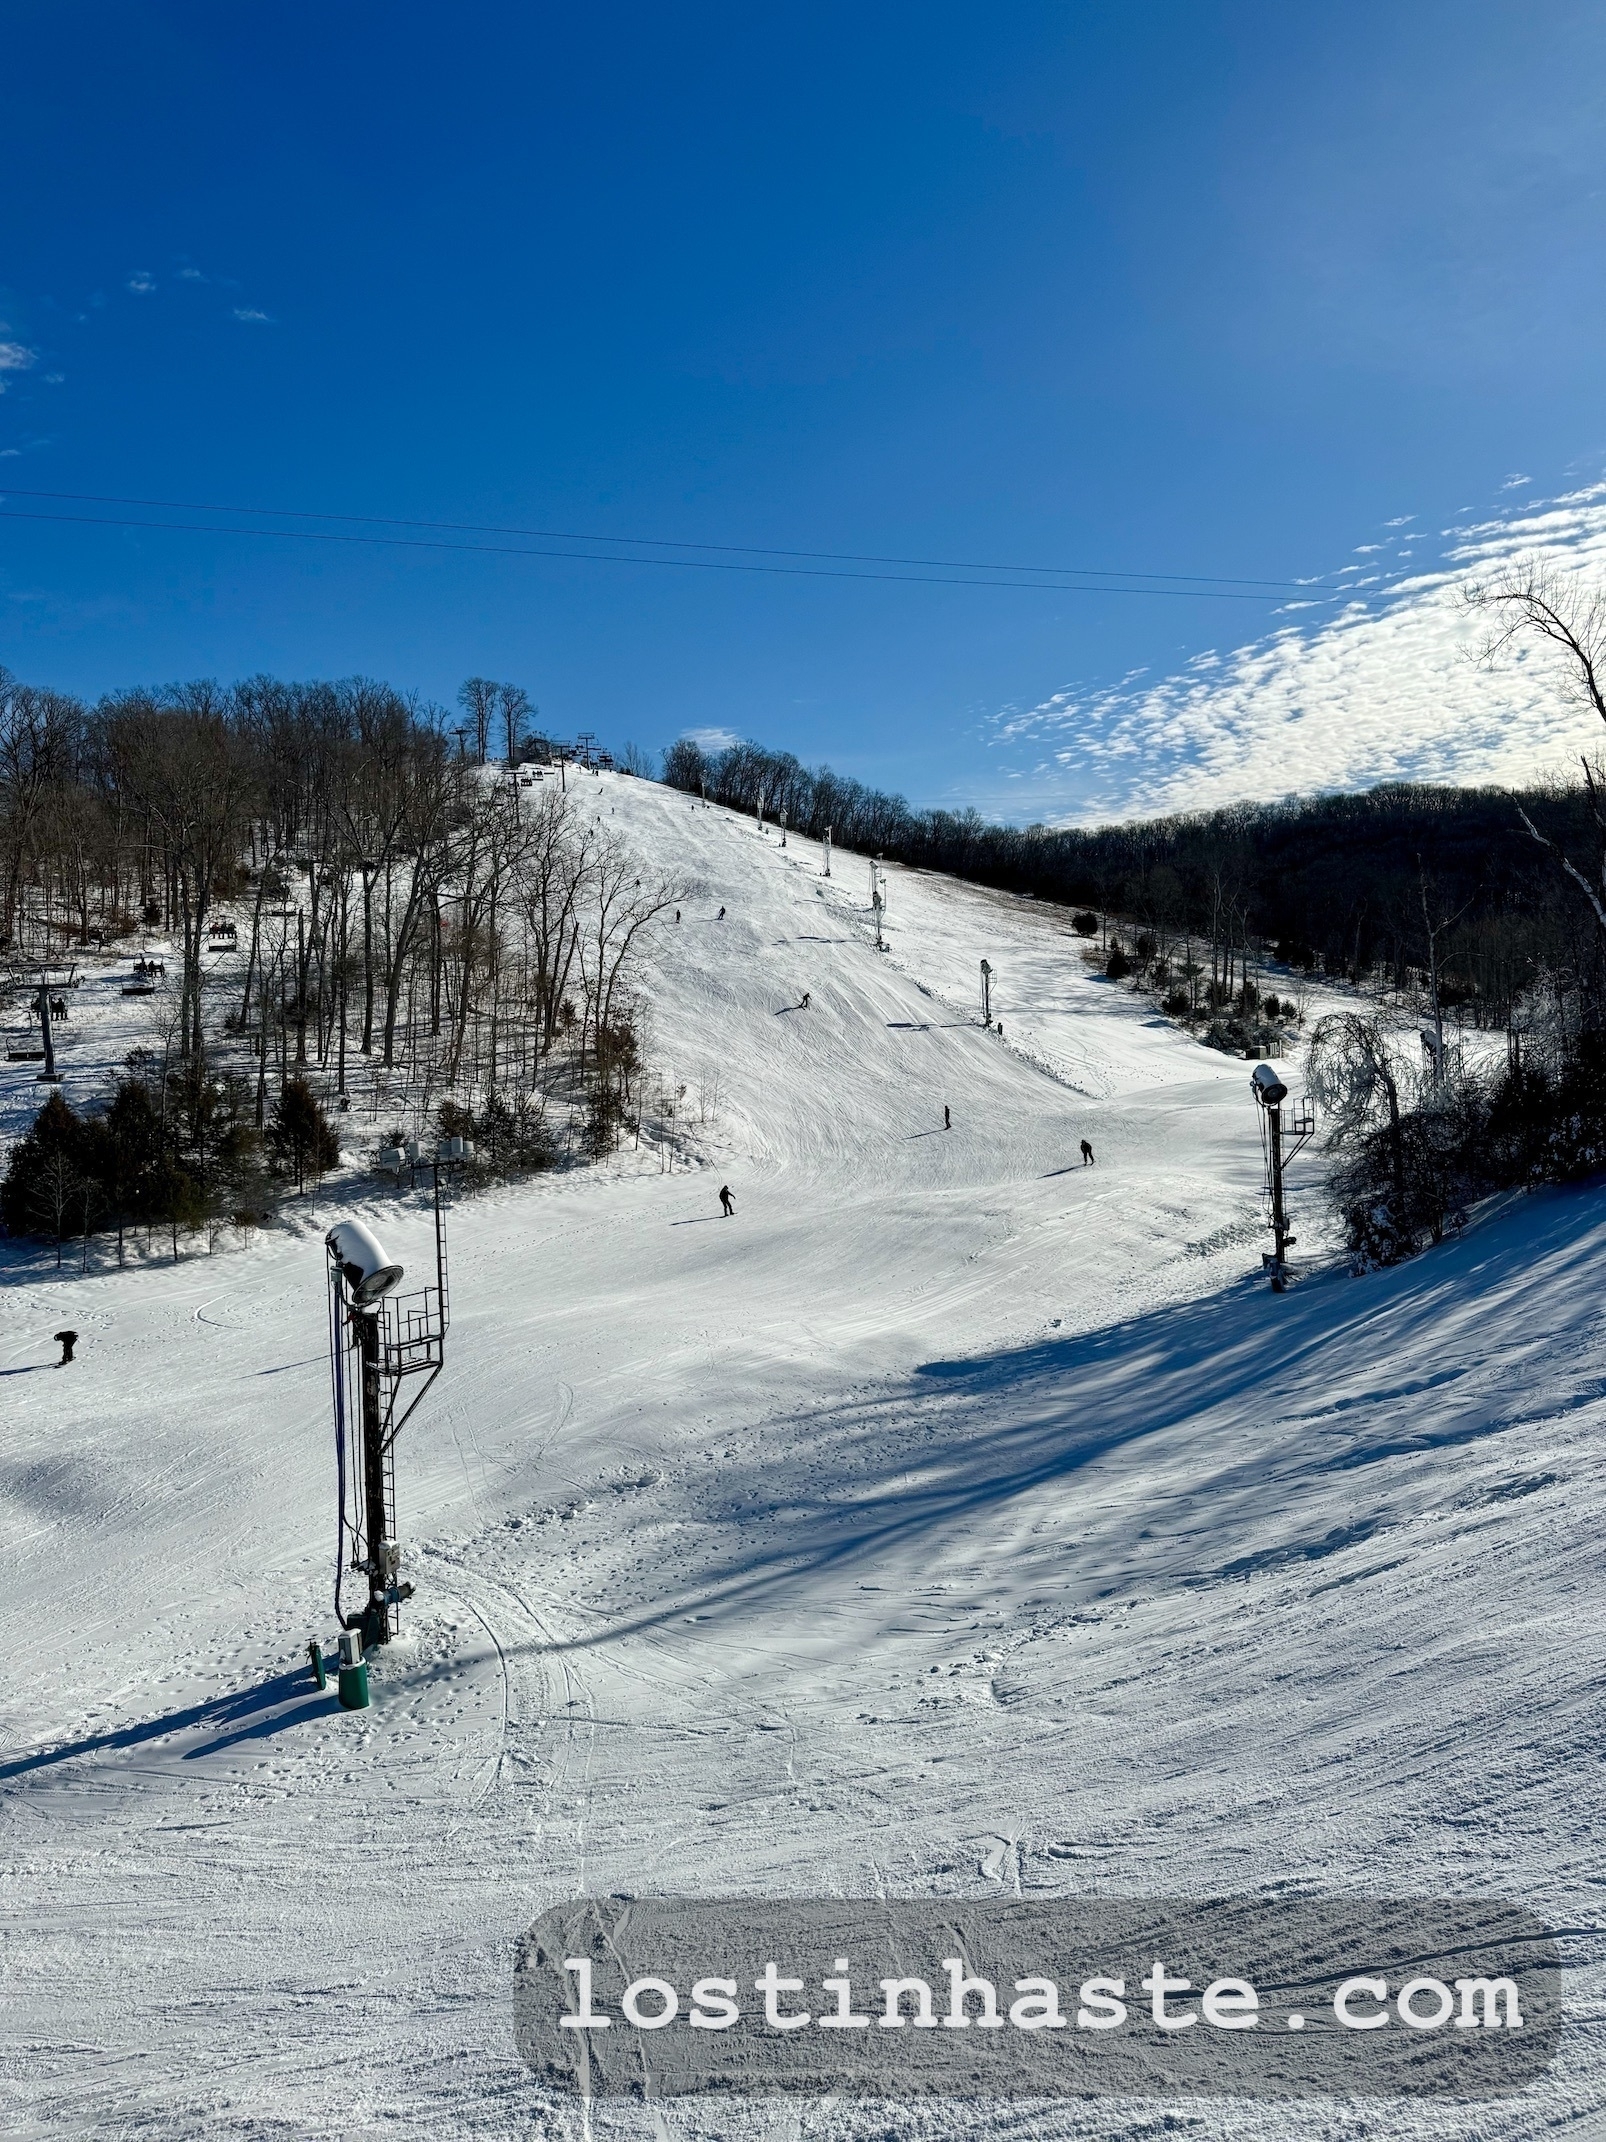 A snowy ski slope with skiers and a chairlift, surrounded by trees under a blue sky with wispy clouds.